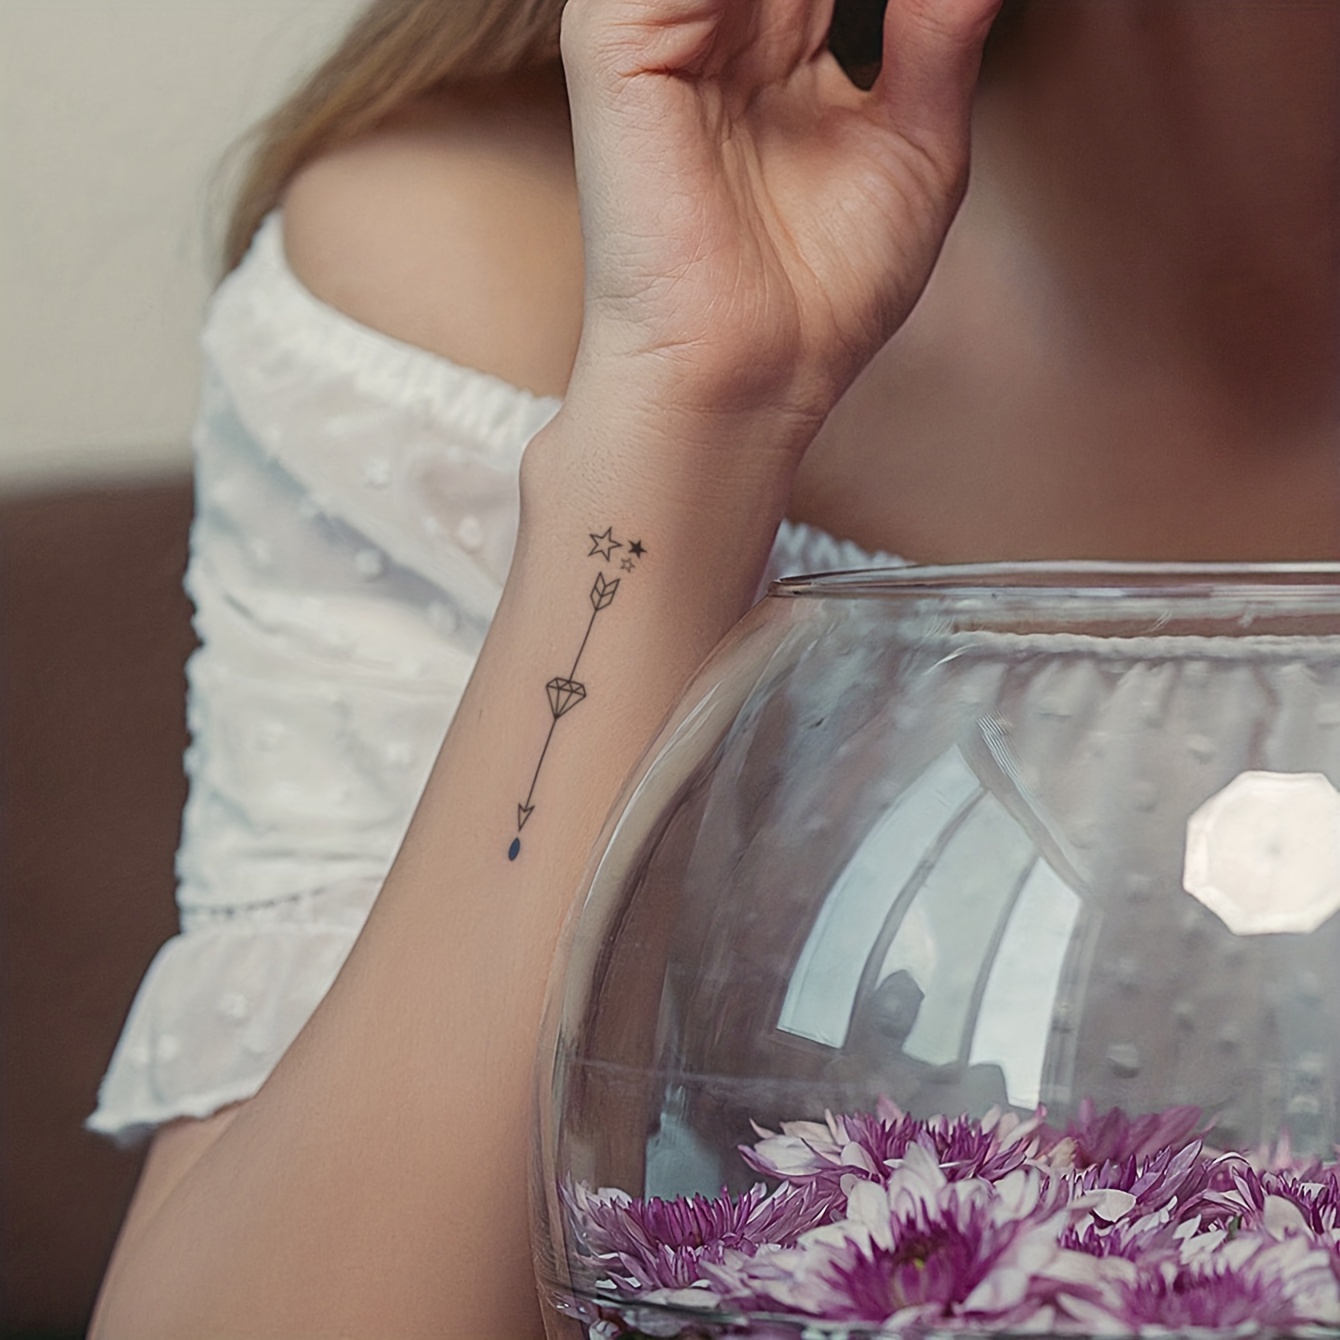 Tattoo of the word free located on the wrist.